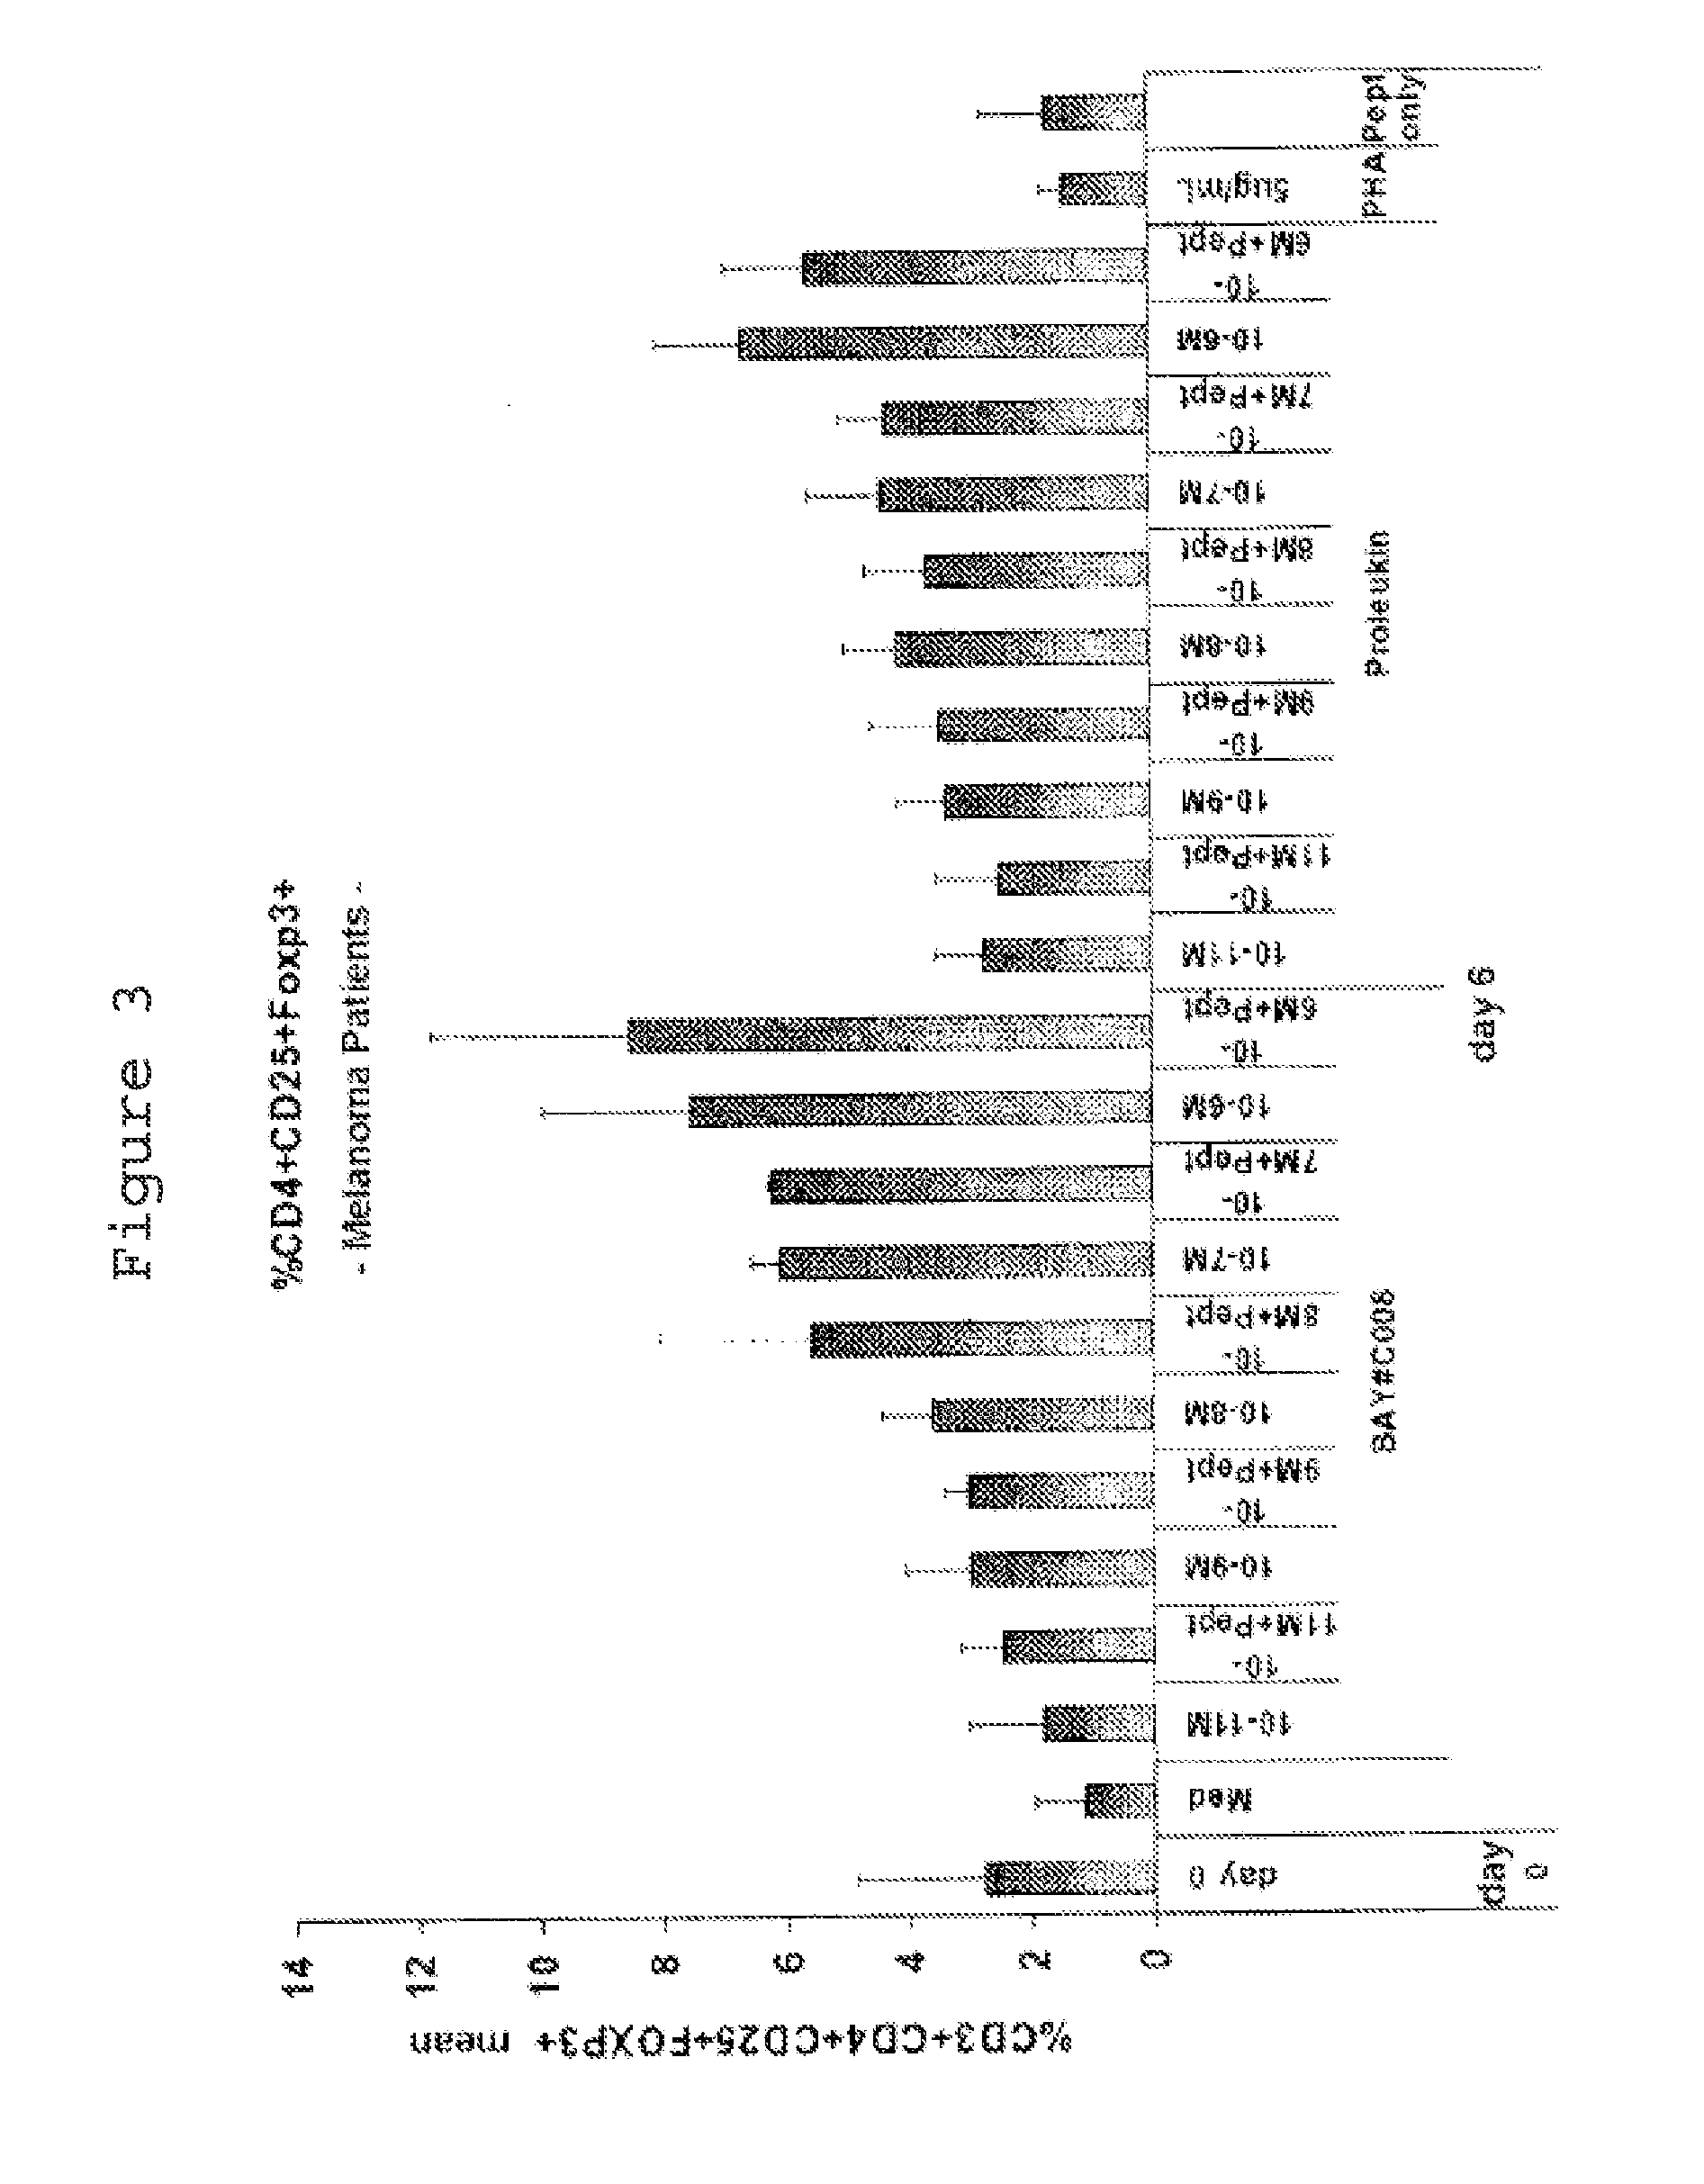 Agent for the treatment and/or prophylaxis of an autoimmune disease and for the formation of regulatory t cells